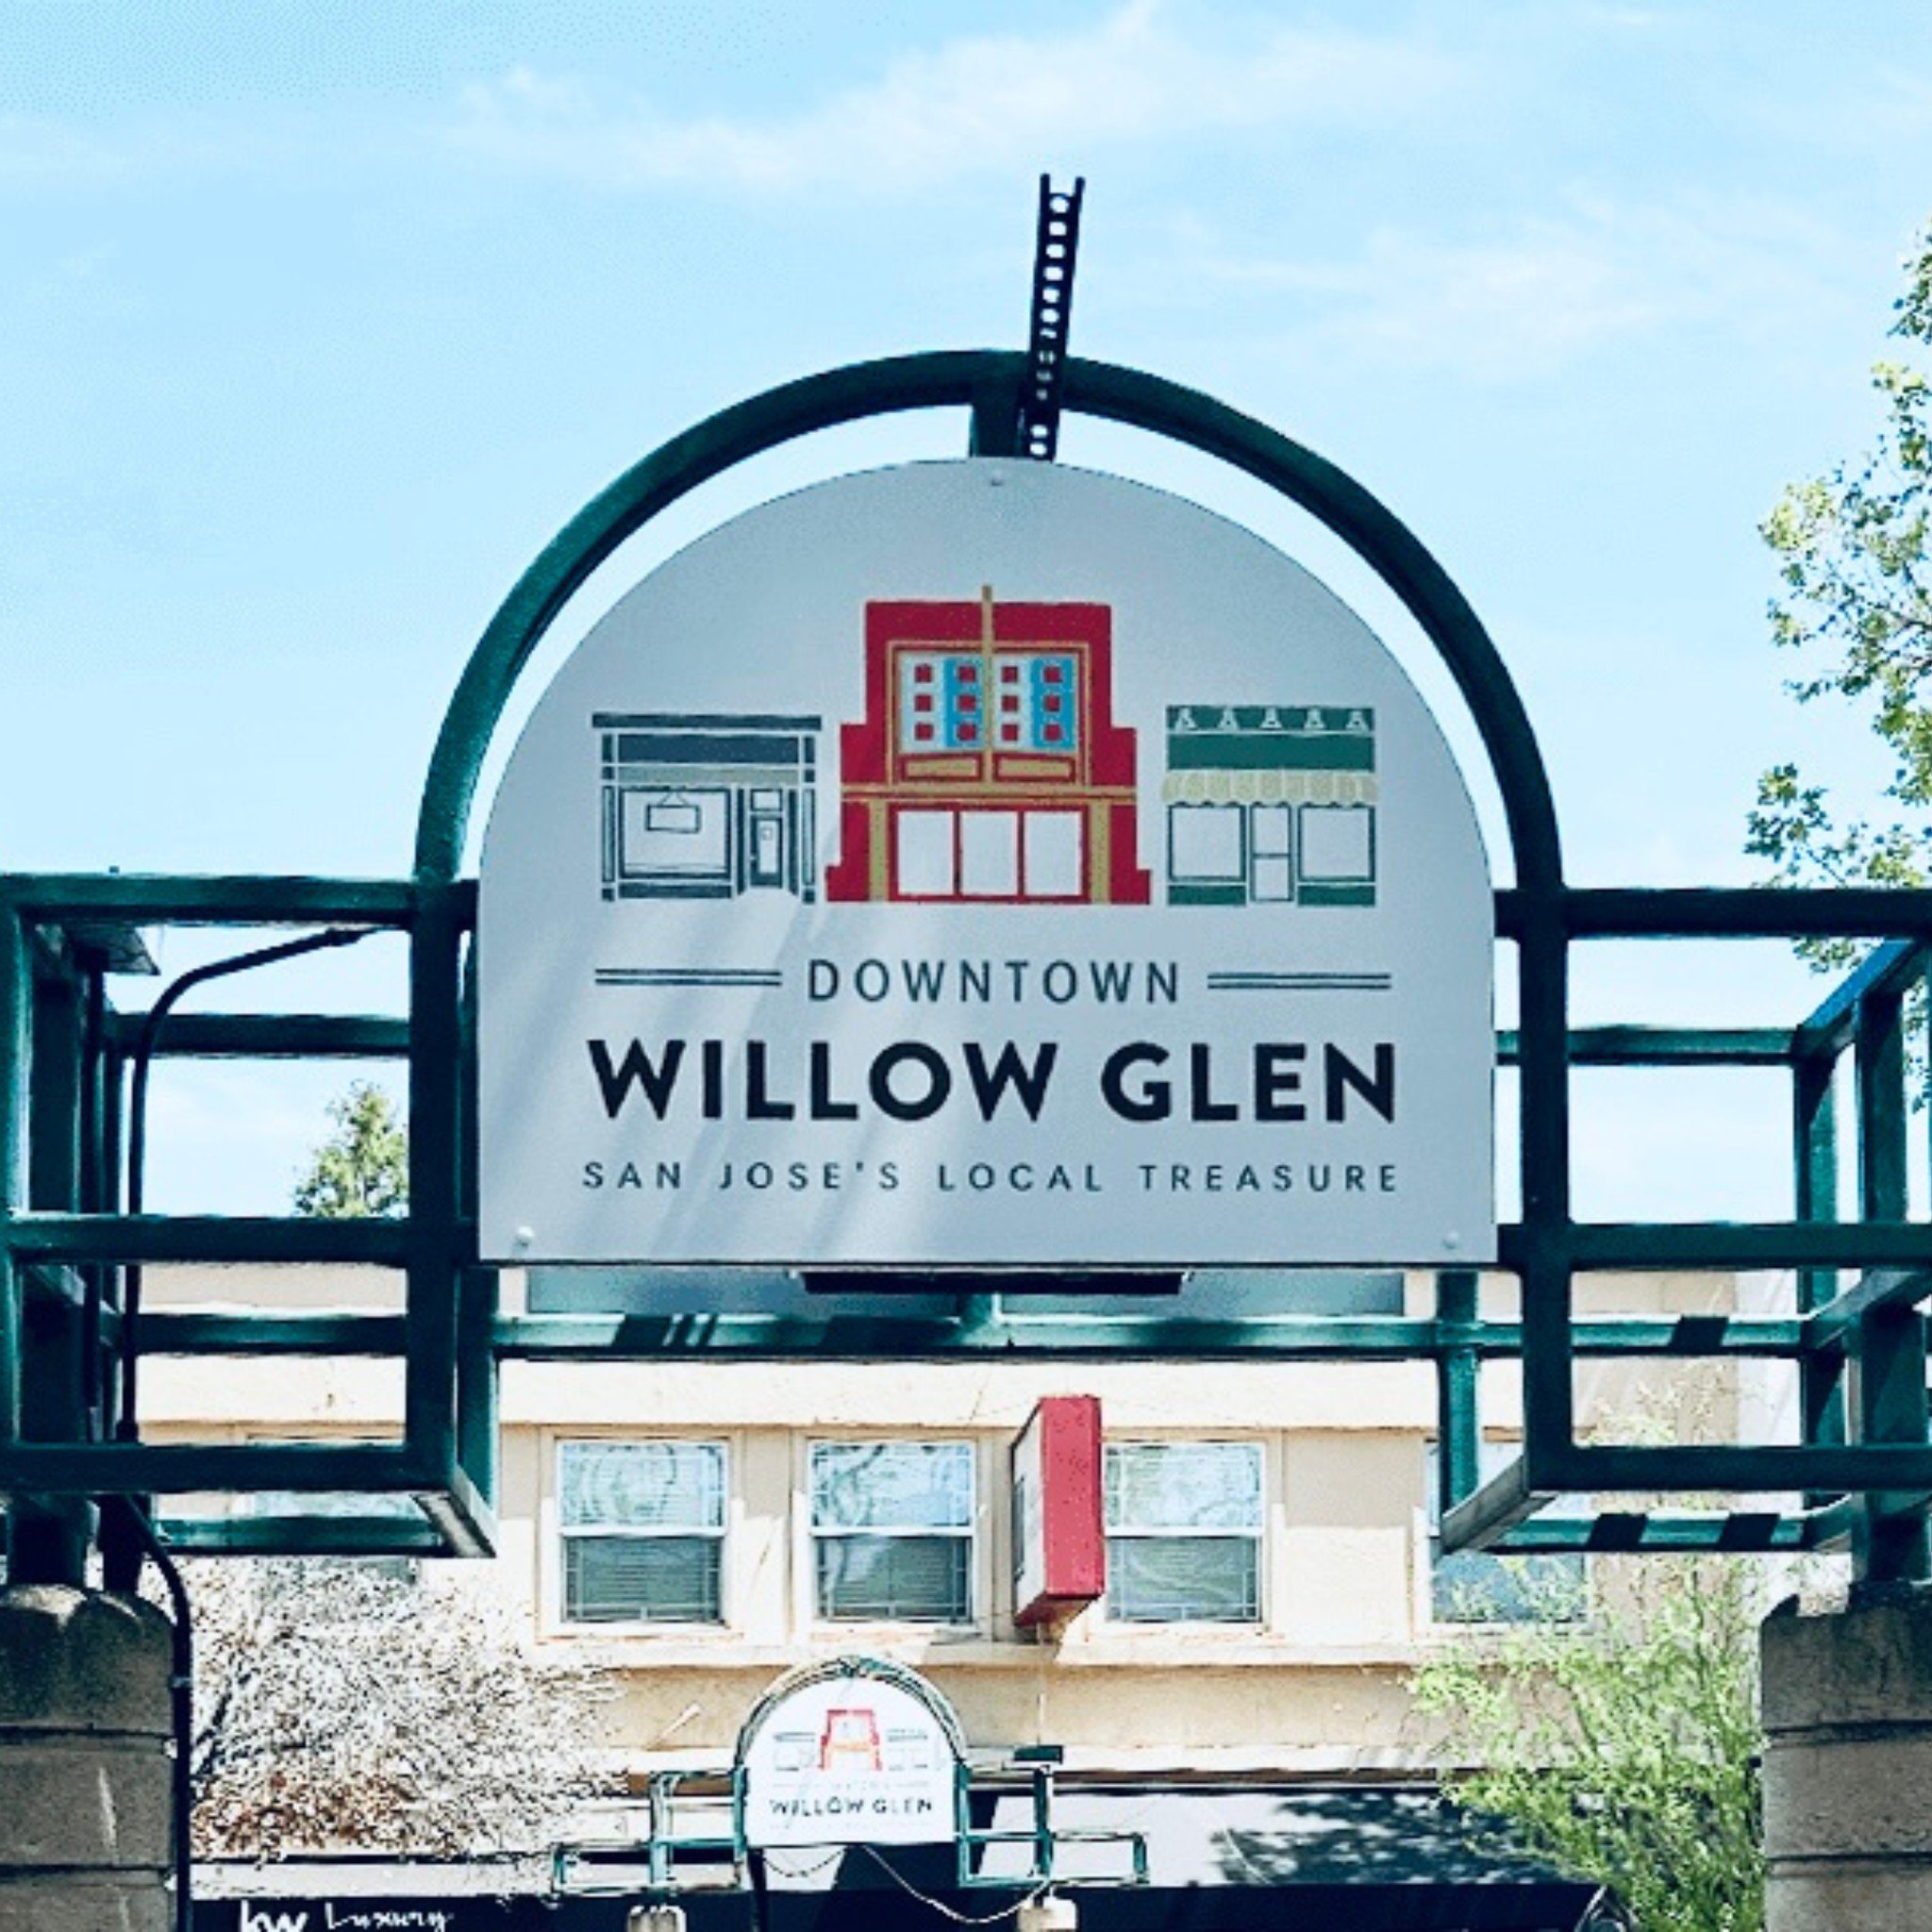 Willow Glen is a charming neighborhood located in San Jose. Known as &ldquo;San Jose&rsquo;s Local Treasure&rdquo;, it&rsquo;s filled will historic homes, tree lined streets, and it is an absolute joy to explore.

Downtown Willow Glen boasts over 250